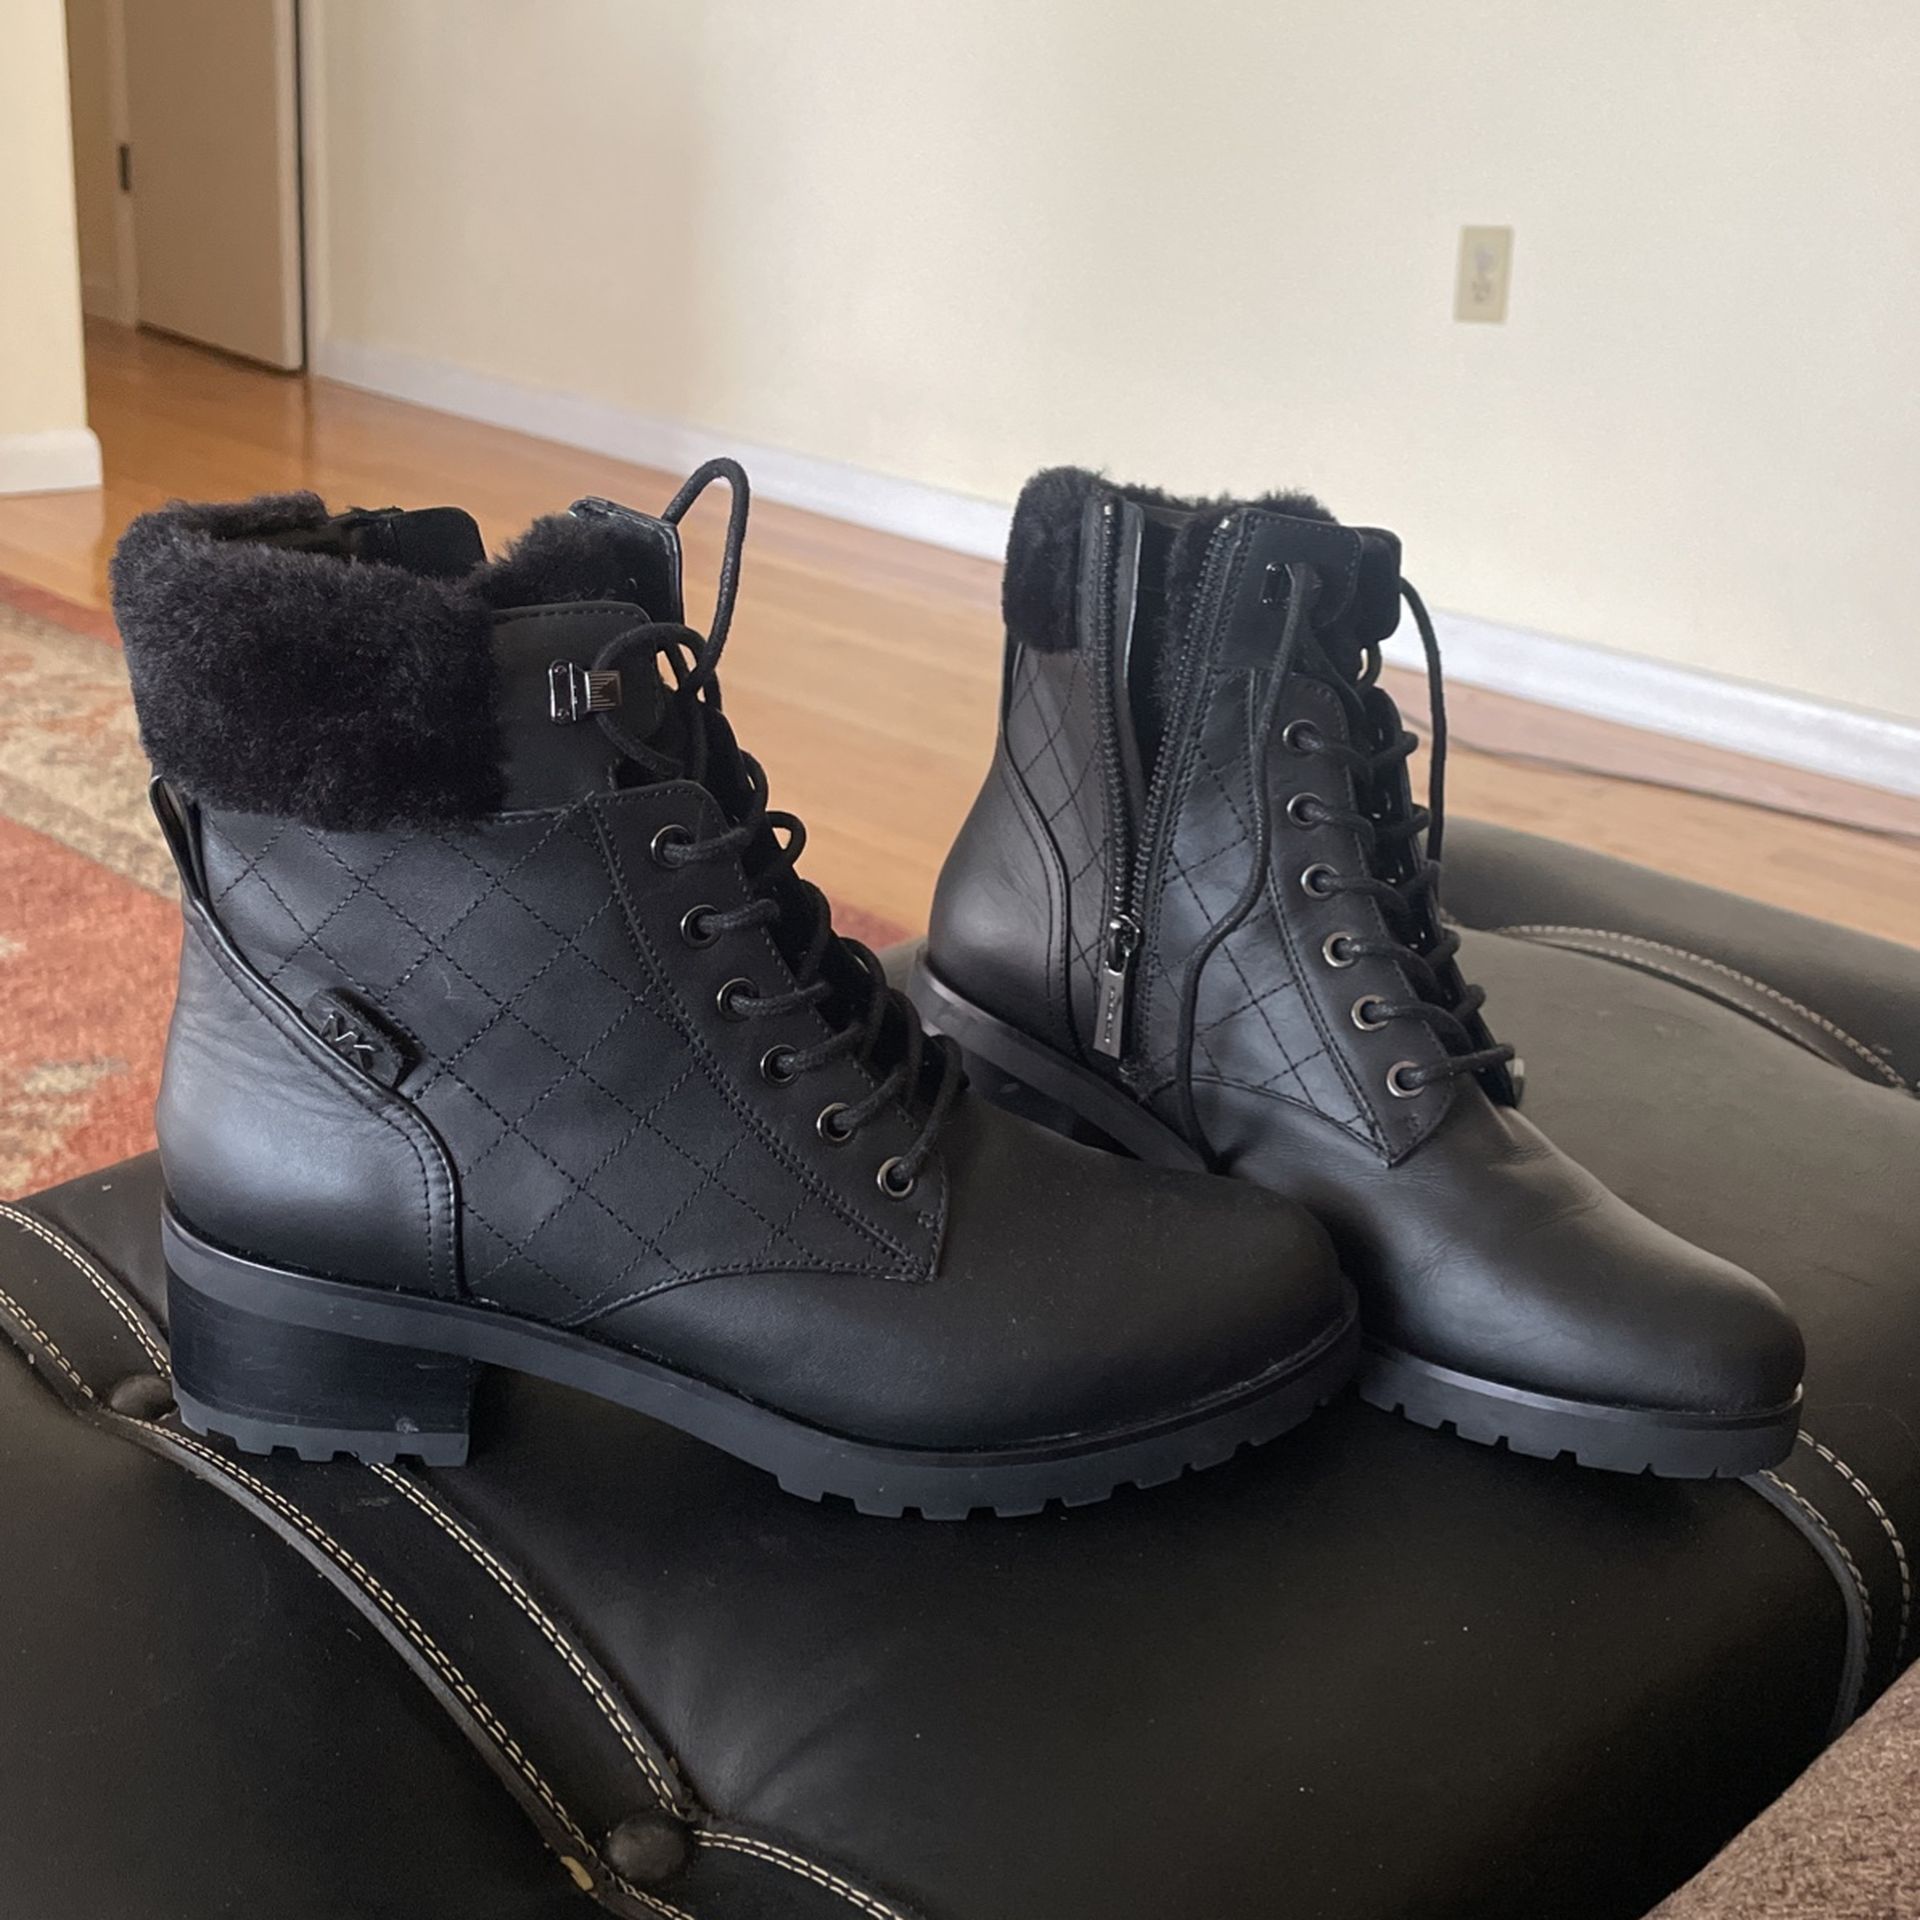 Michael Kors Winter Boots, 7.5 Sale in KY - OfferUp